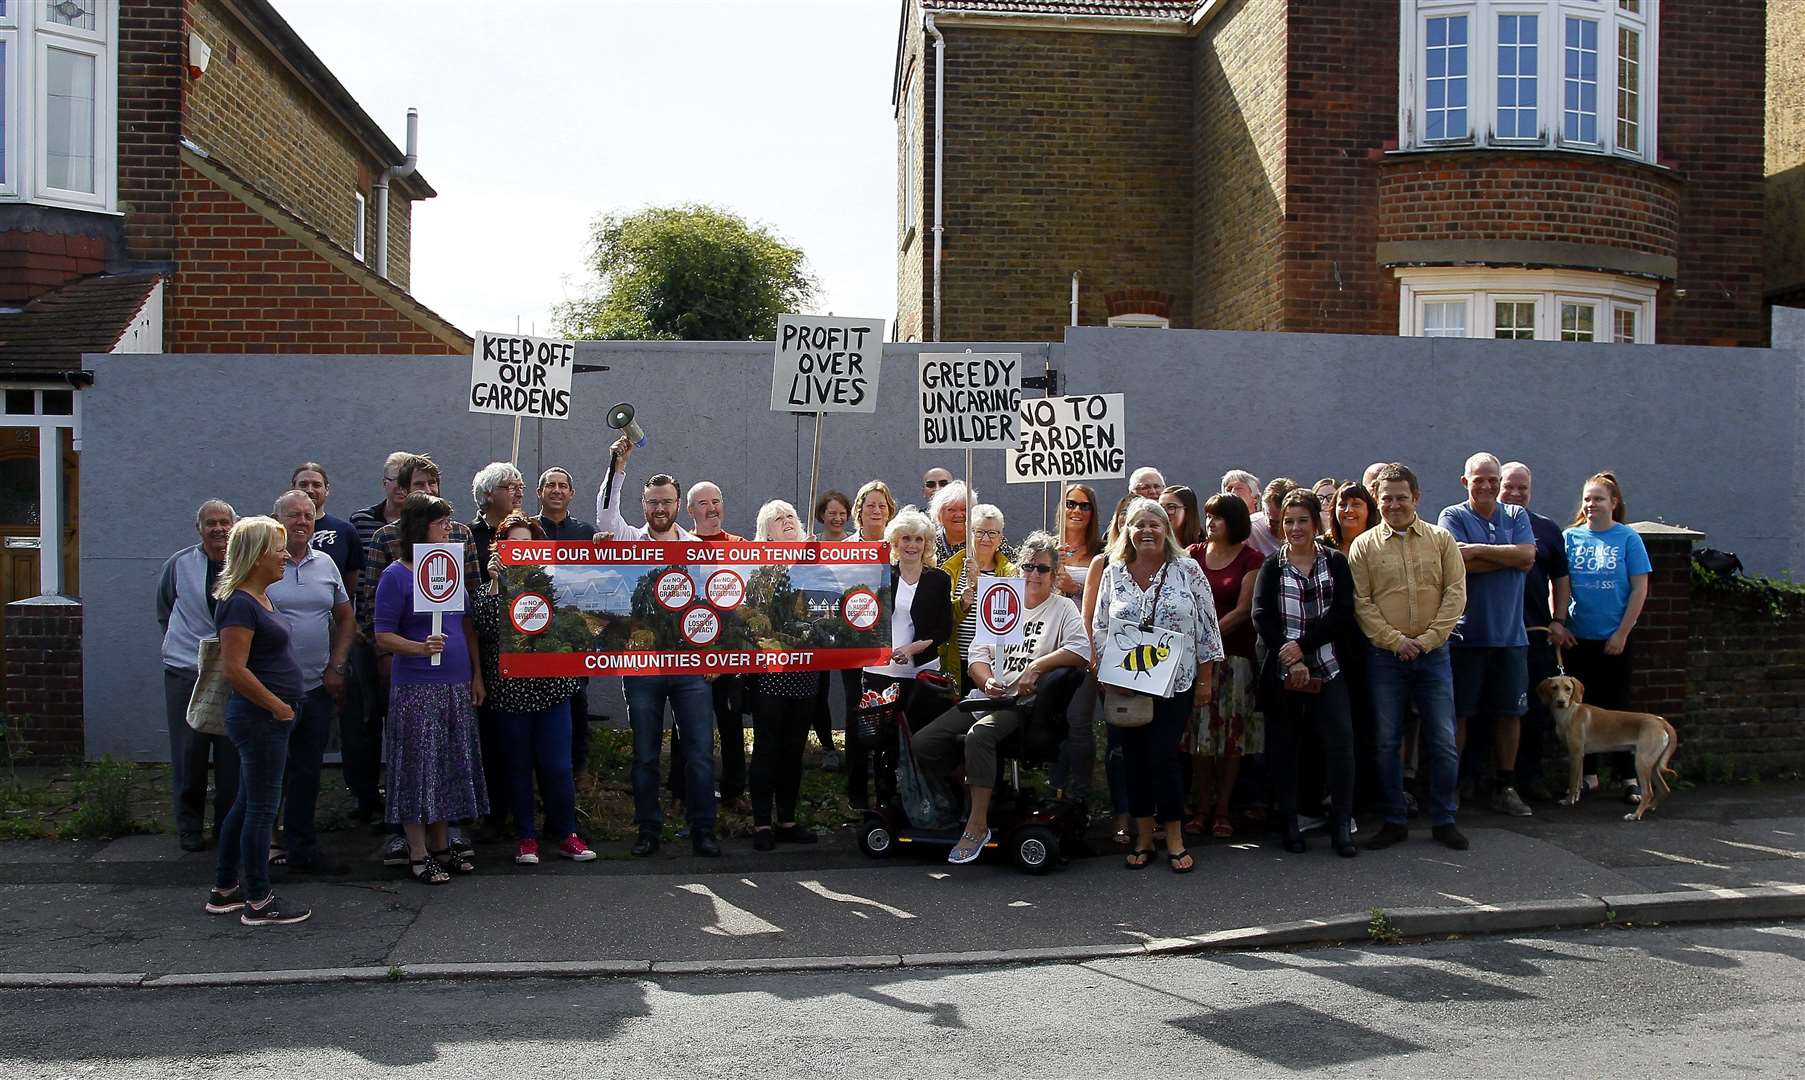 Protesters back in 2019 at Second Avenue close to where the proposed access road to the development